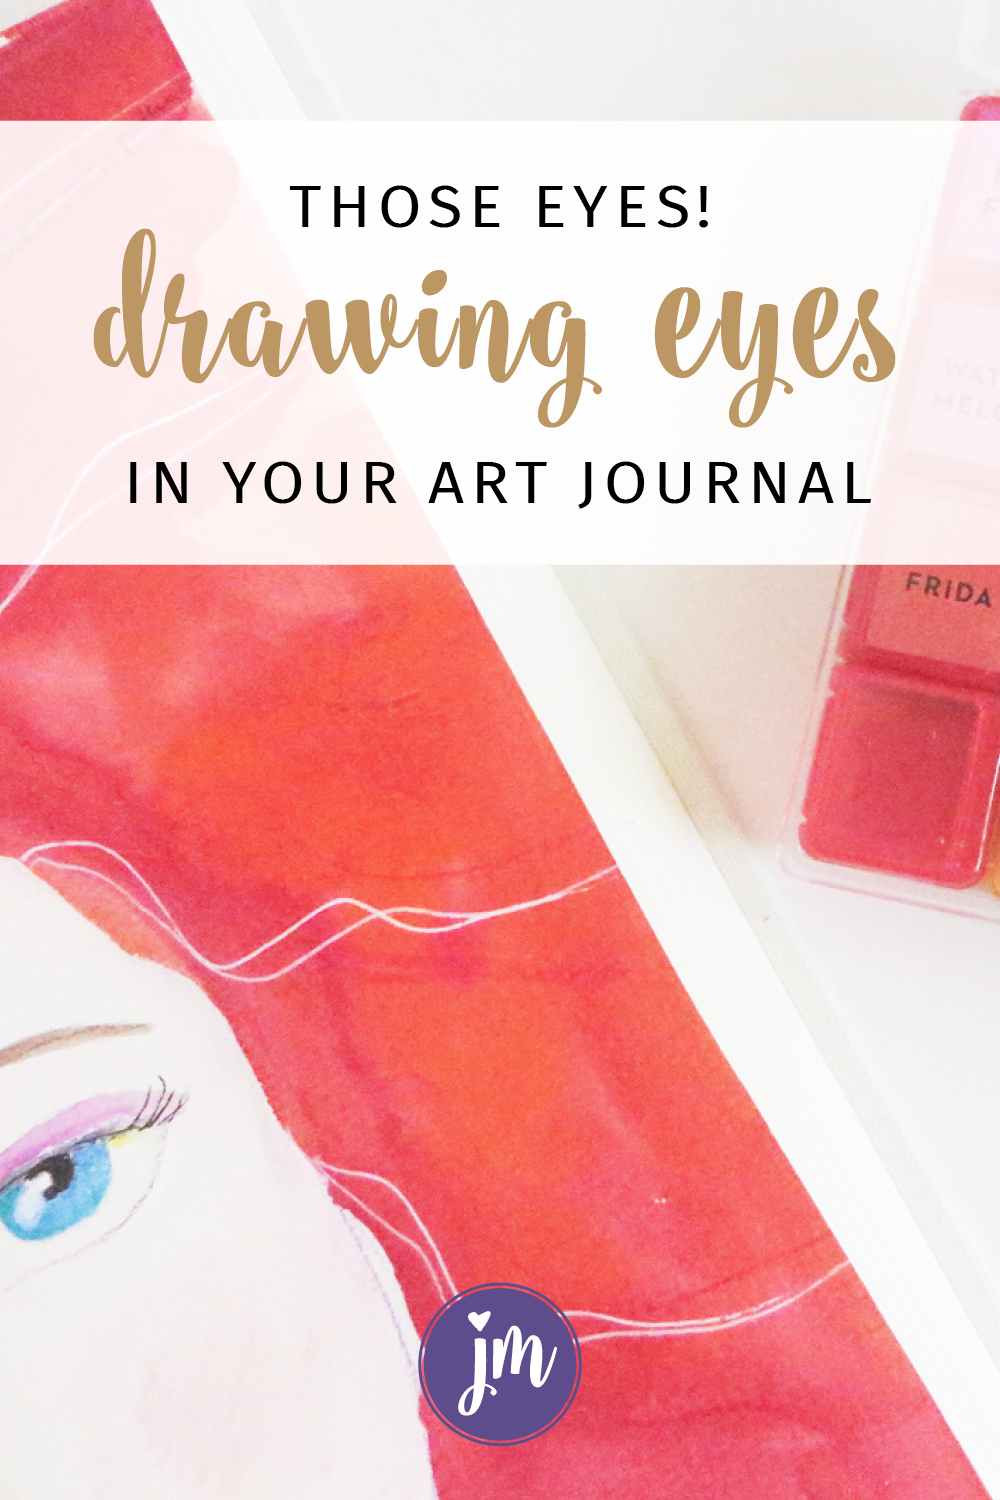 Those Eyes! Drawing Eyes in Your Art Journal